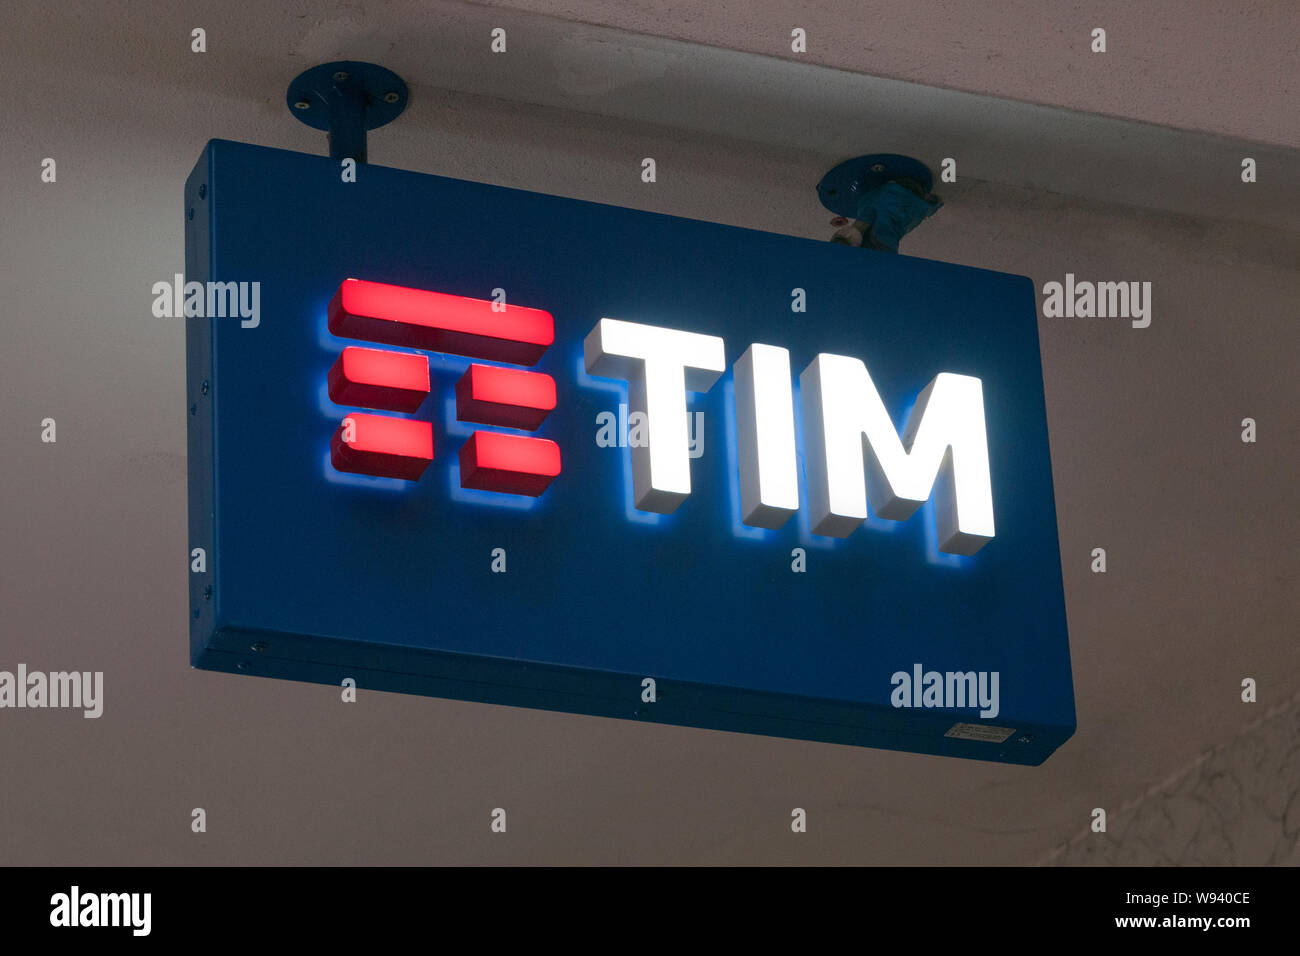 Telecom Italia Mobile High Resolution Stock Photography and Images - Alamy